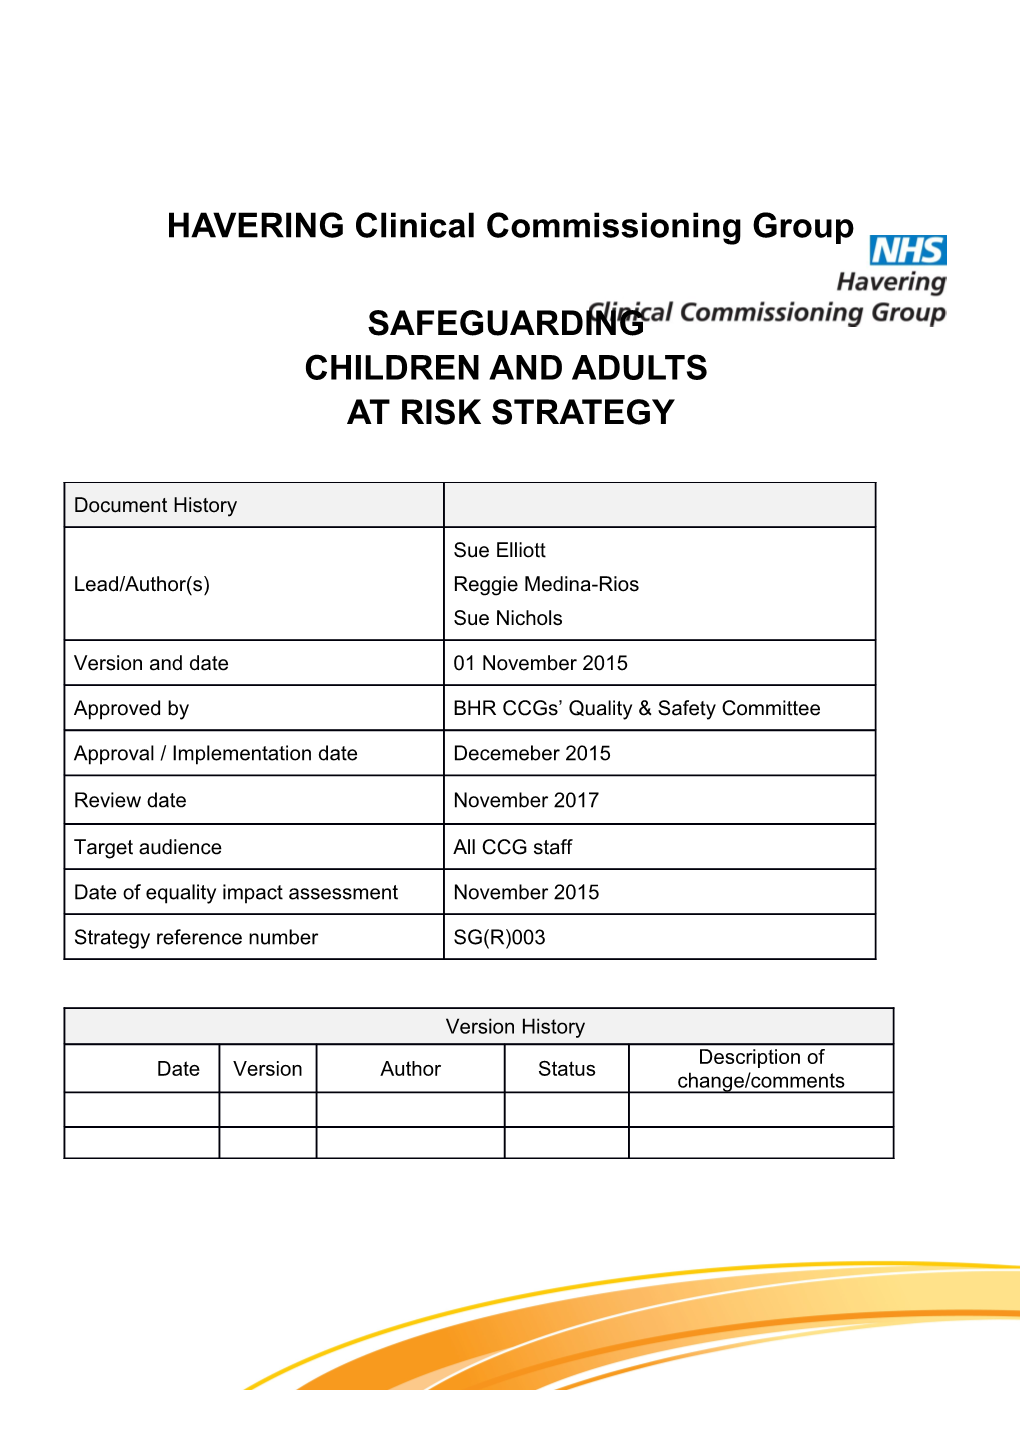 HAVERING Clinical Commissioning Group